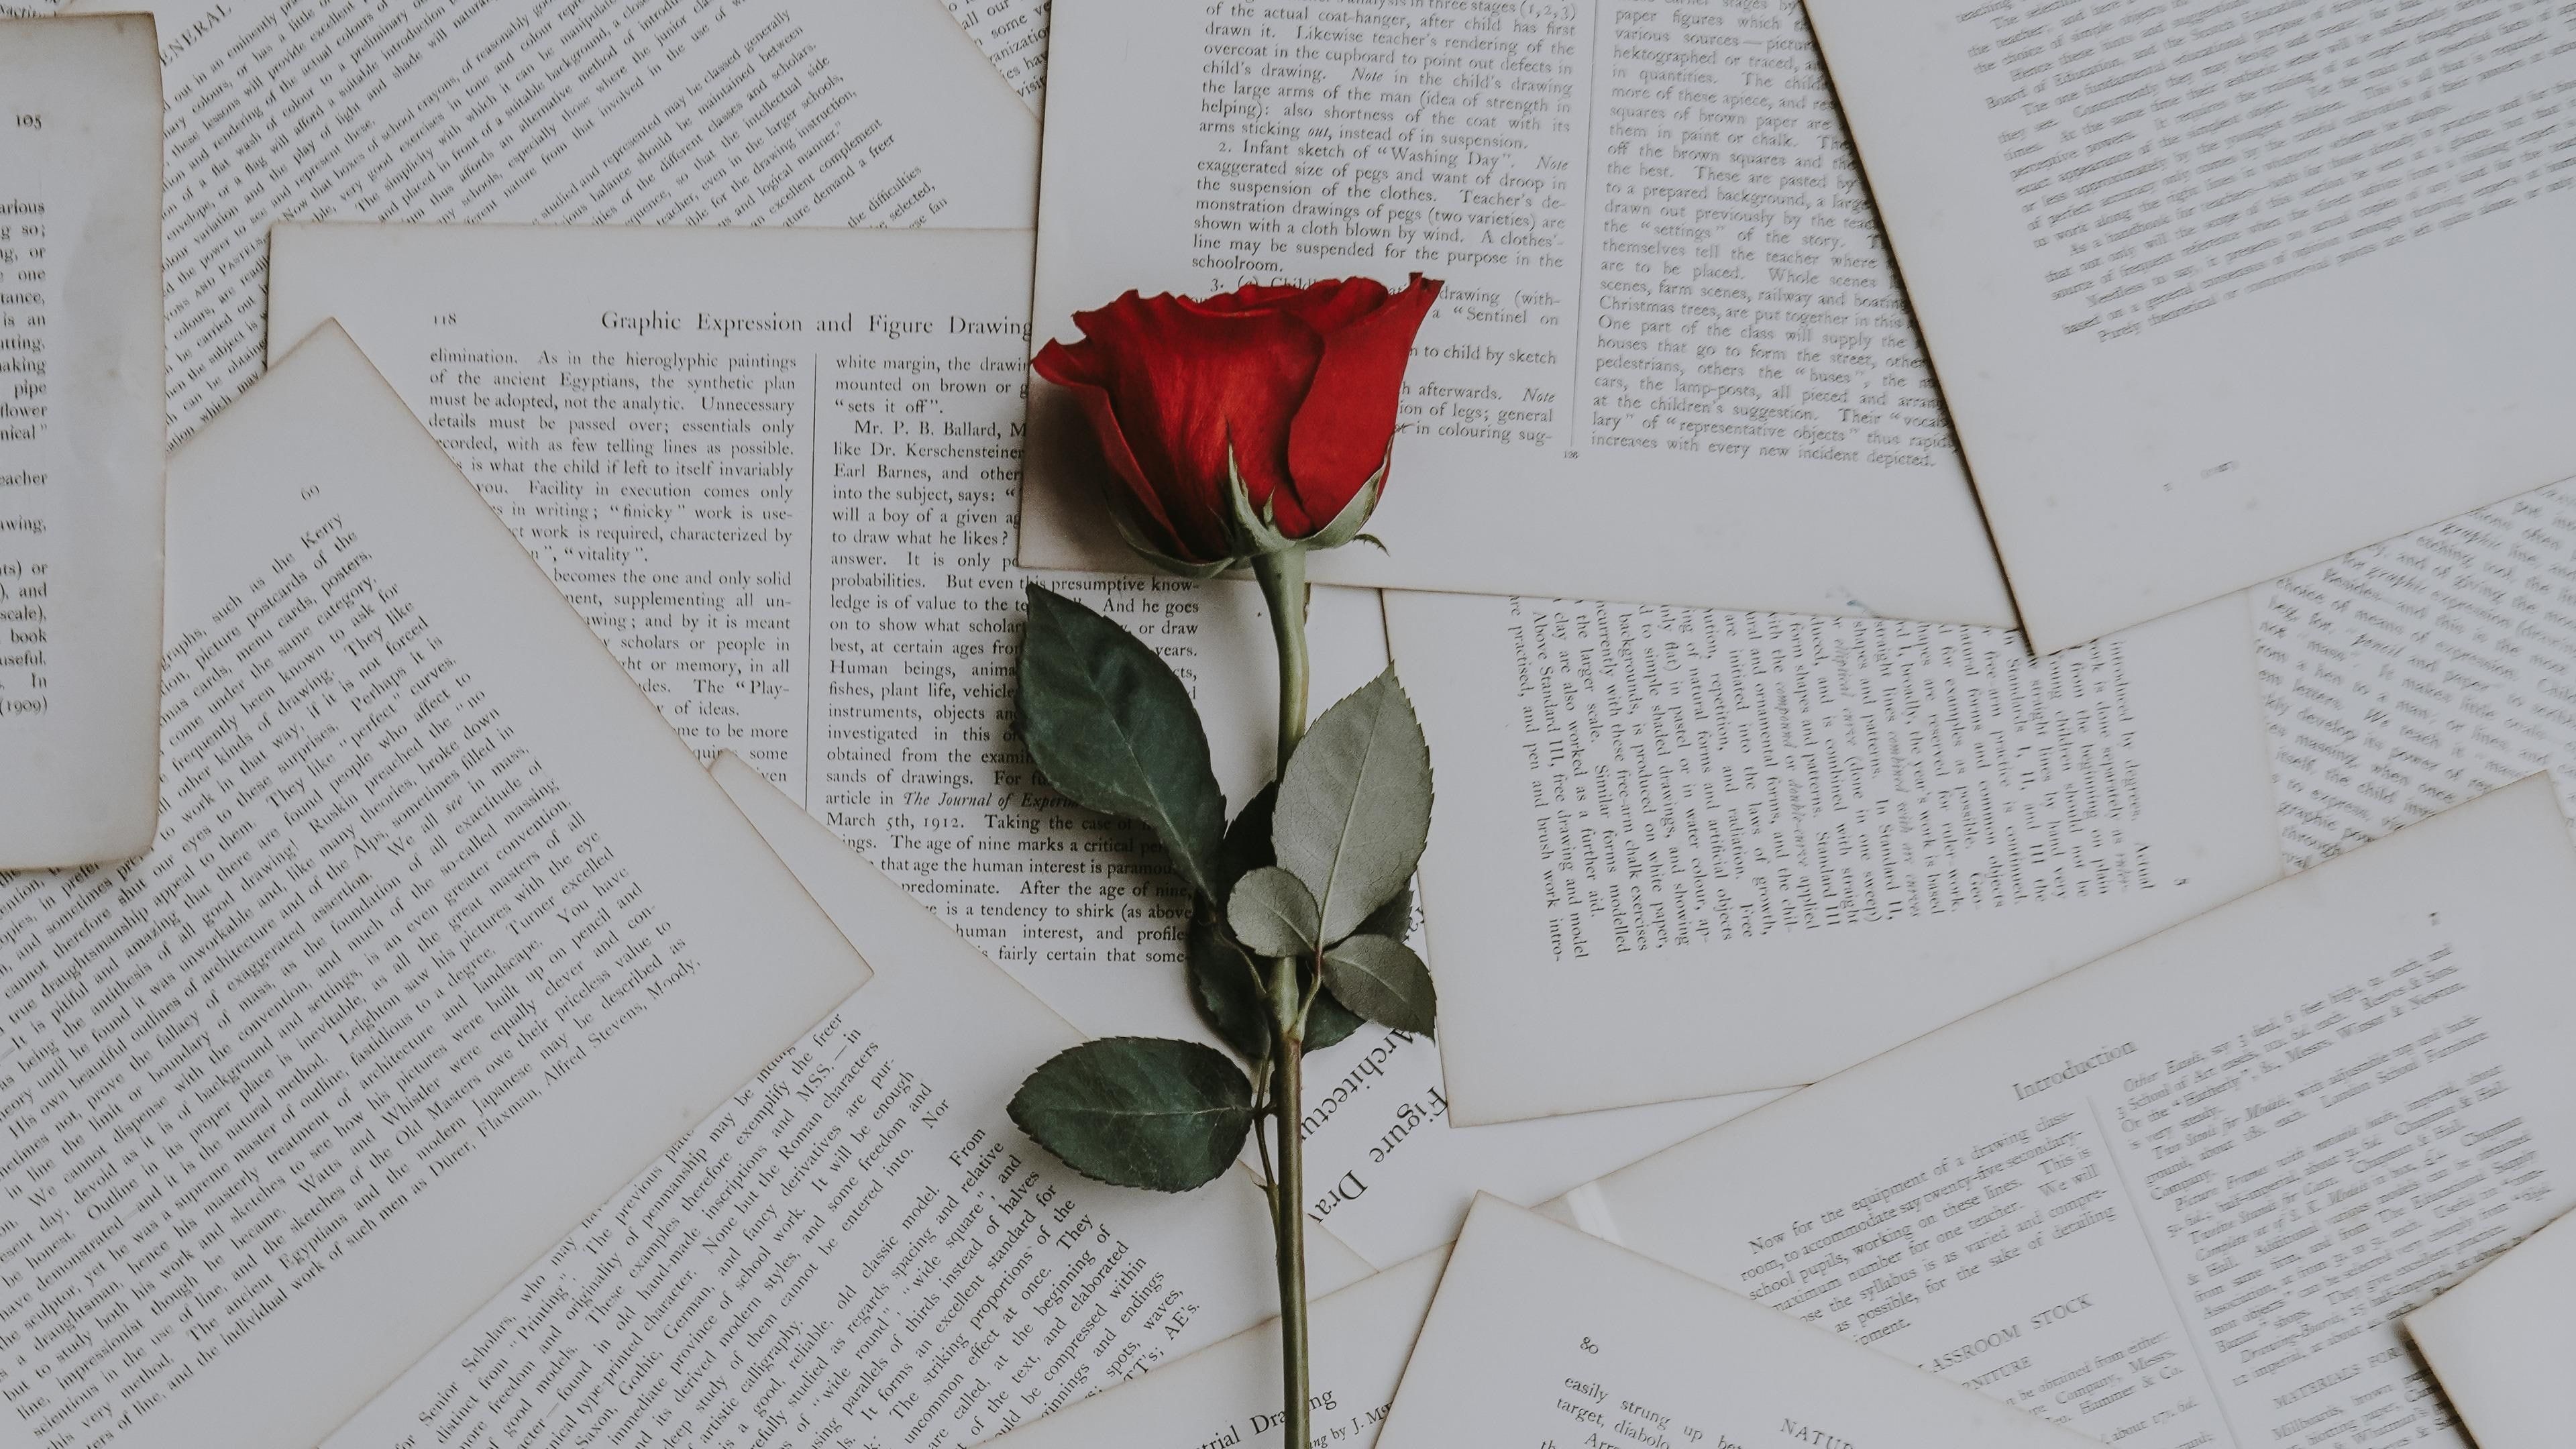 red rose #rose book pages #flower #paper #petal book page #page #pages #romant. Laptop wallpaper desktop wallpaper, Cute desktop wallpaper, Cute laptop wallpaper